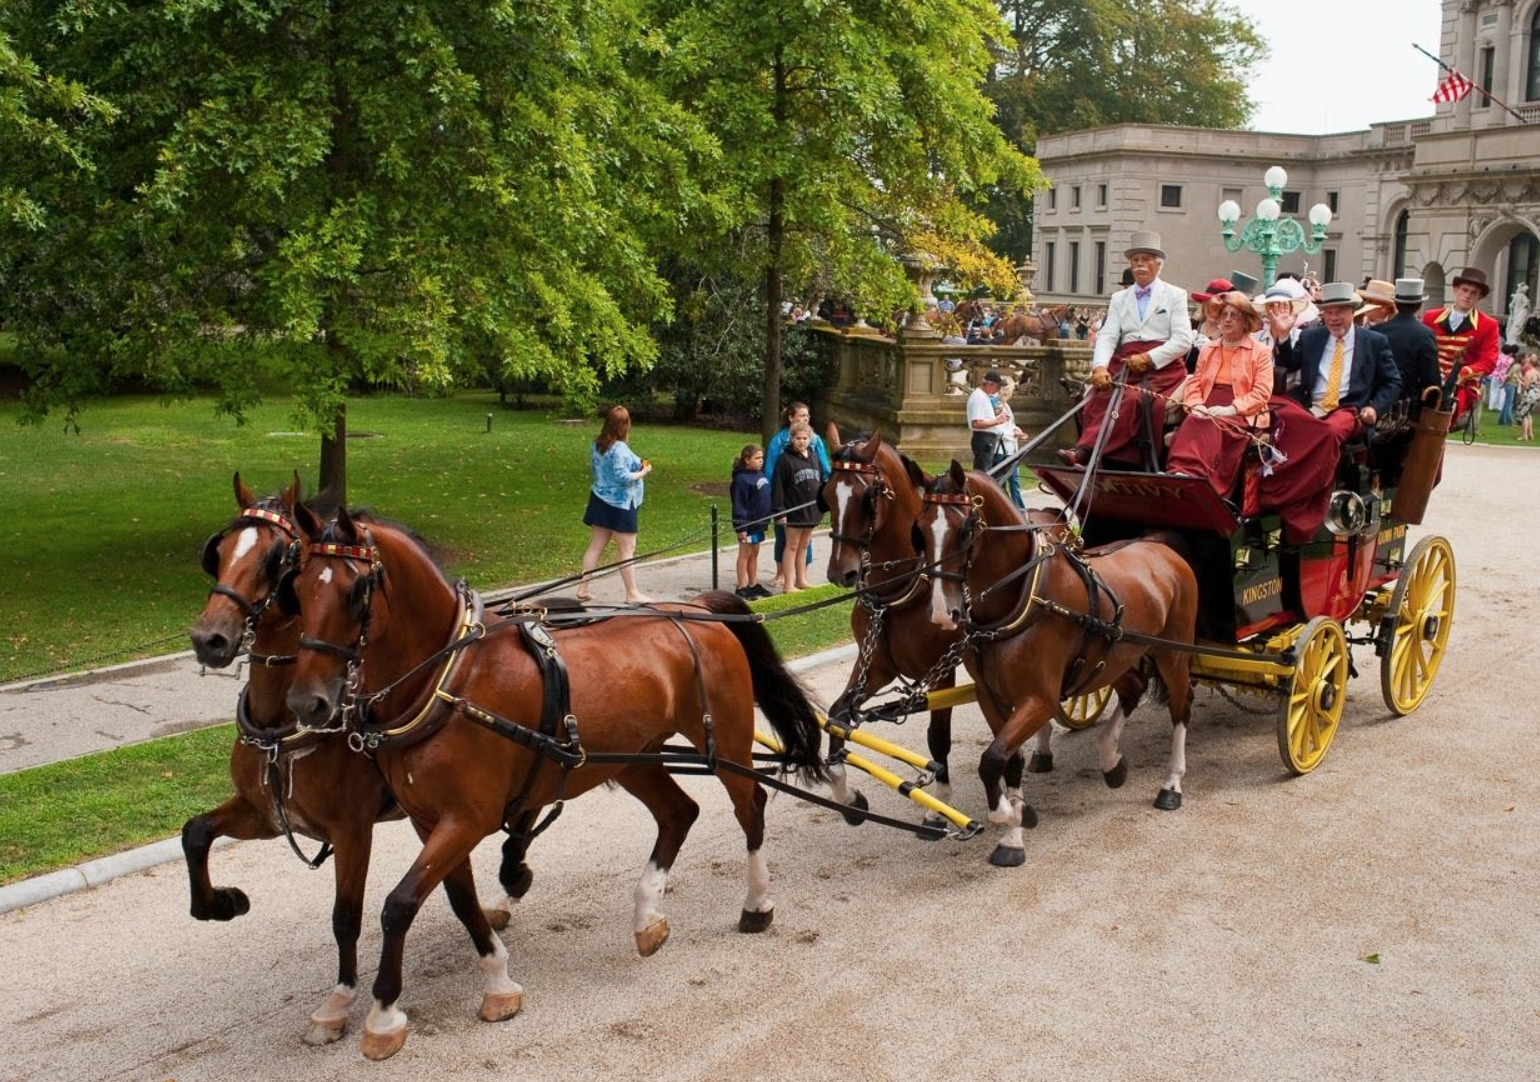 Newport, Rhode Island, as 19th century carriages, led by stately steeds, gallantly gather to herald Coaching Weekend in Newport.  From August 16th  to 19th, The Preservation Society of Newport County hosts members of the Carriage Association of American 